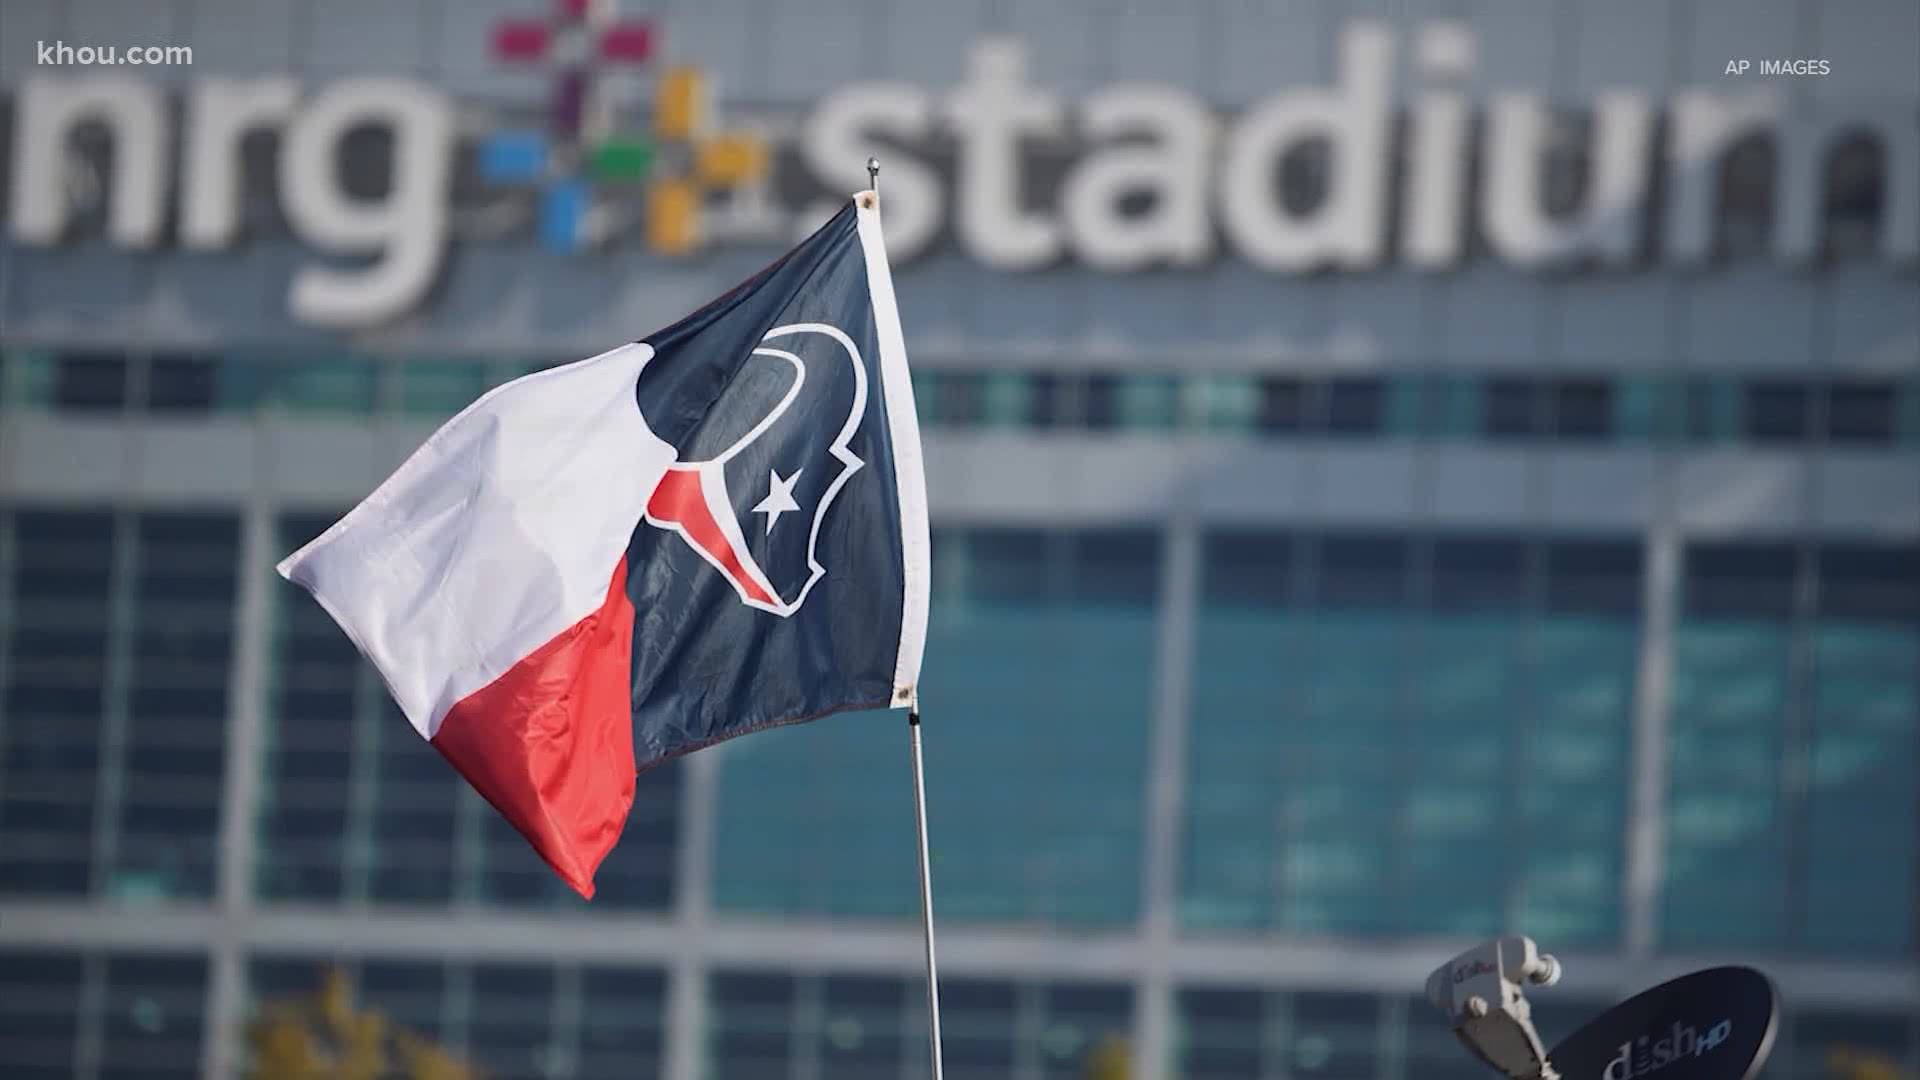 Several Houston Texans and Dallas Cowboys players have tested positive for coronavirus, according to multiple reports.